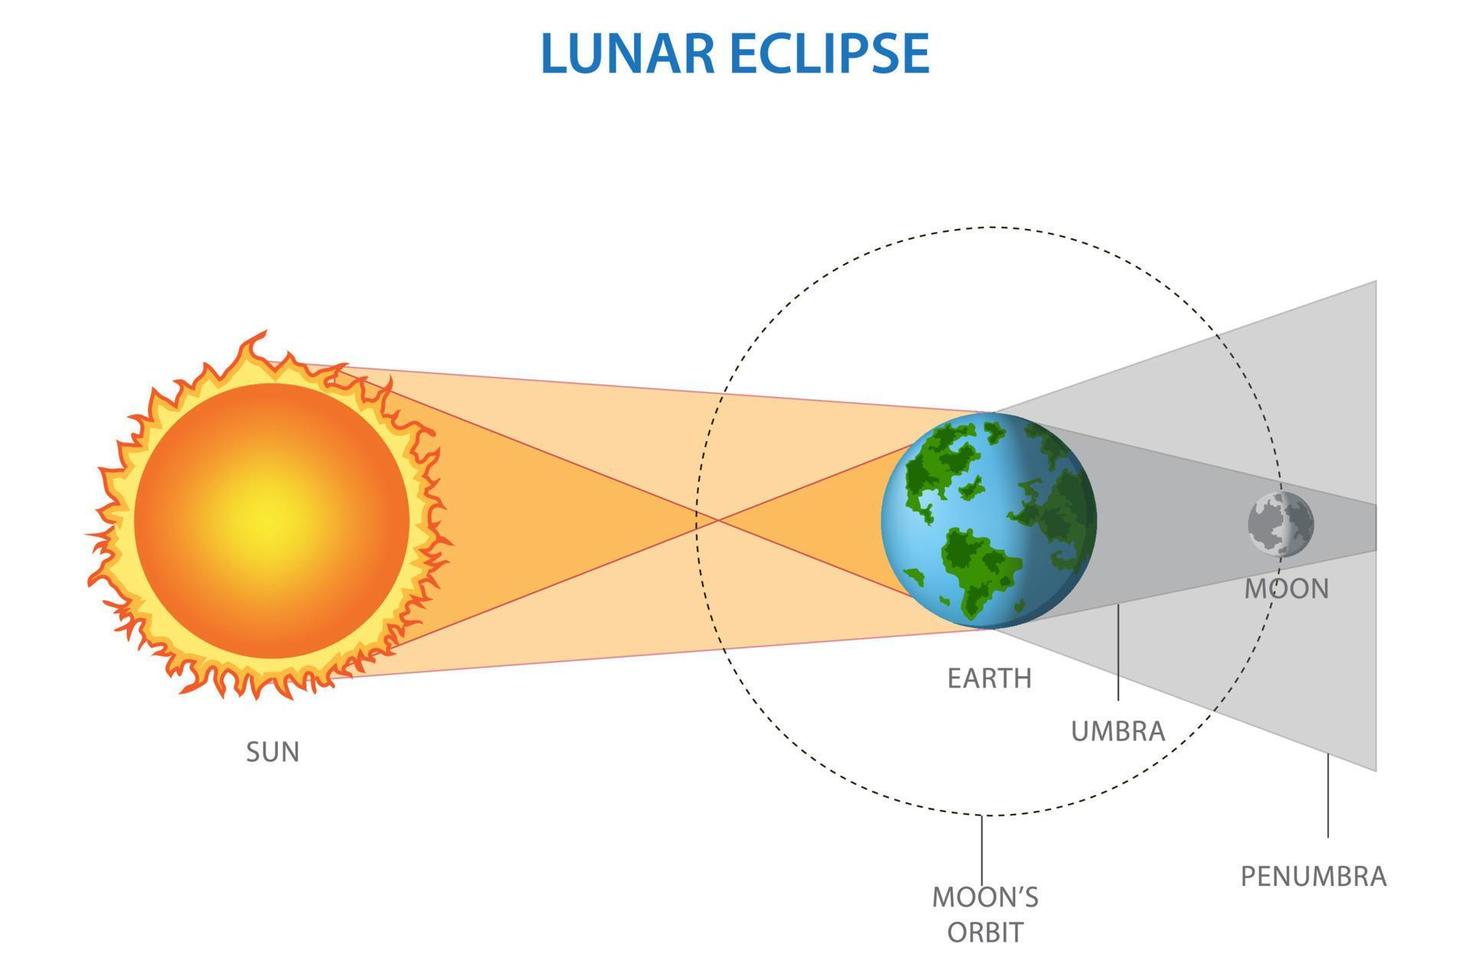 Lunar eclipse occurs when the Earth passes between the Sun and the Moon vector